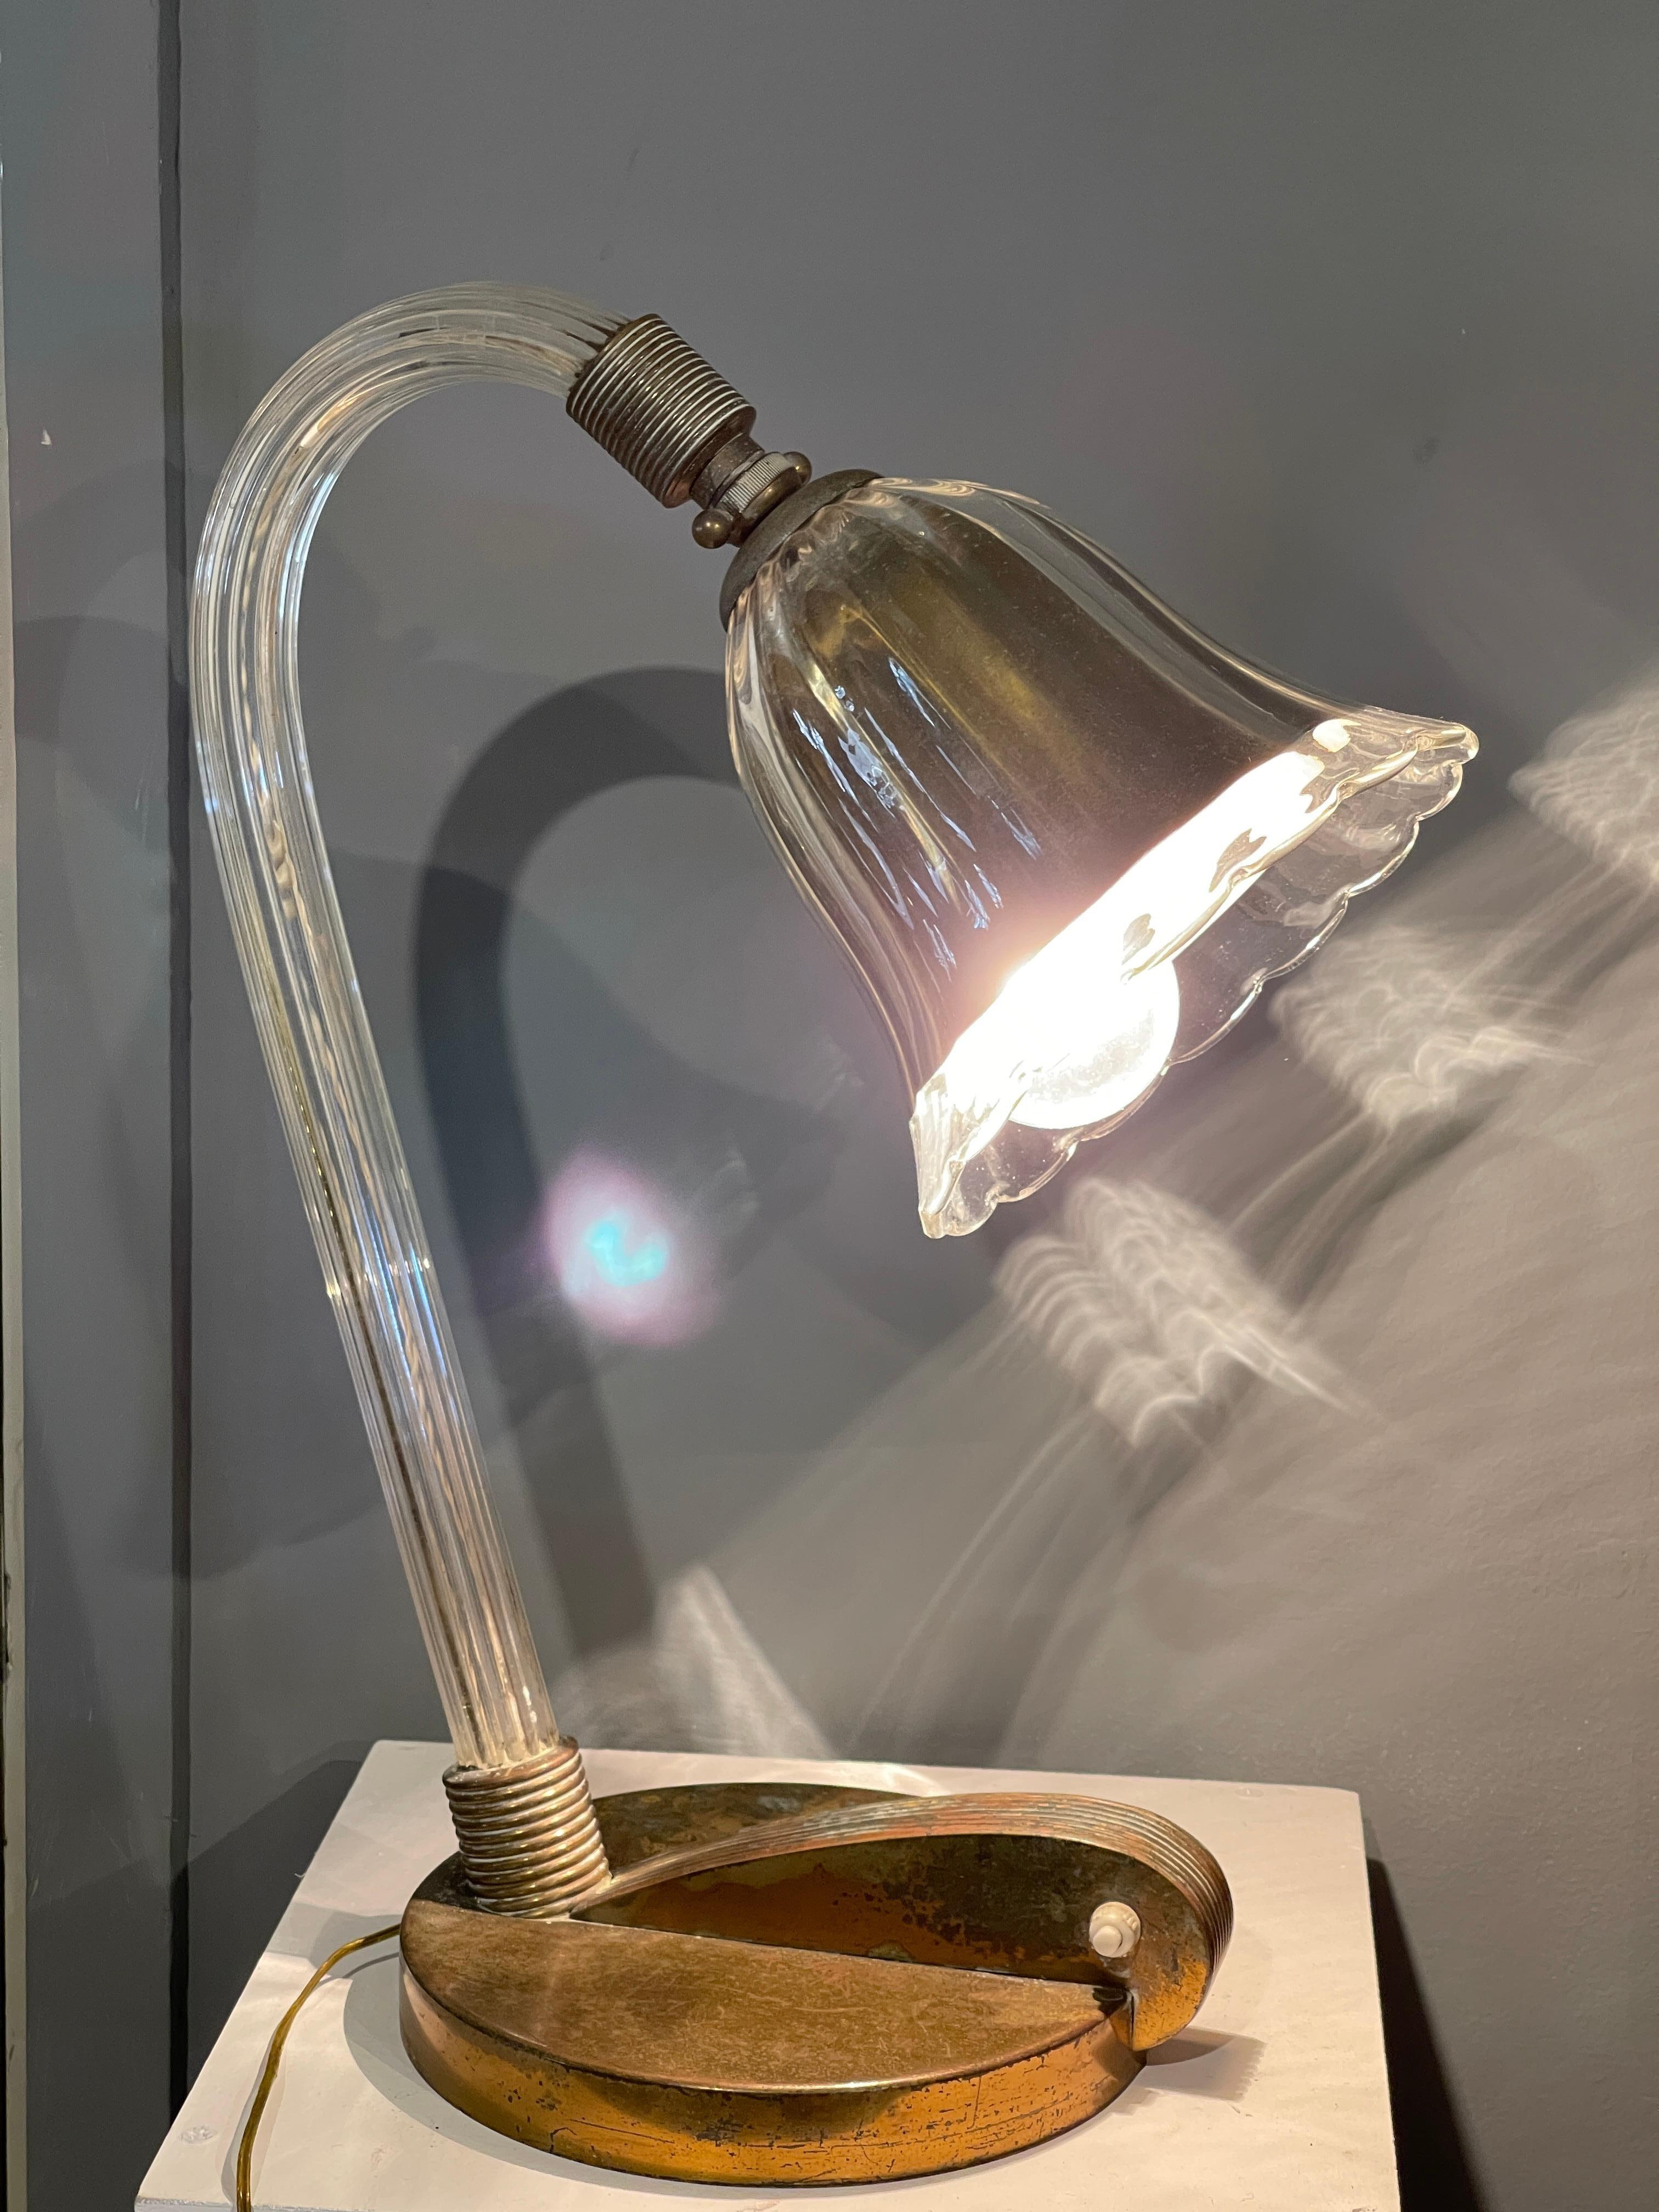 Table lamp in murano glass and brass, produced by the Barovier company in 1933, reflecting the Deco style of the time.